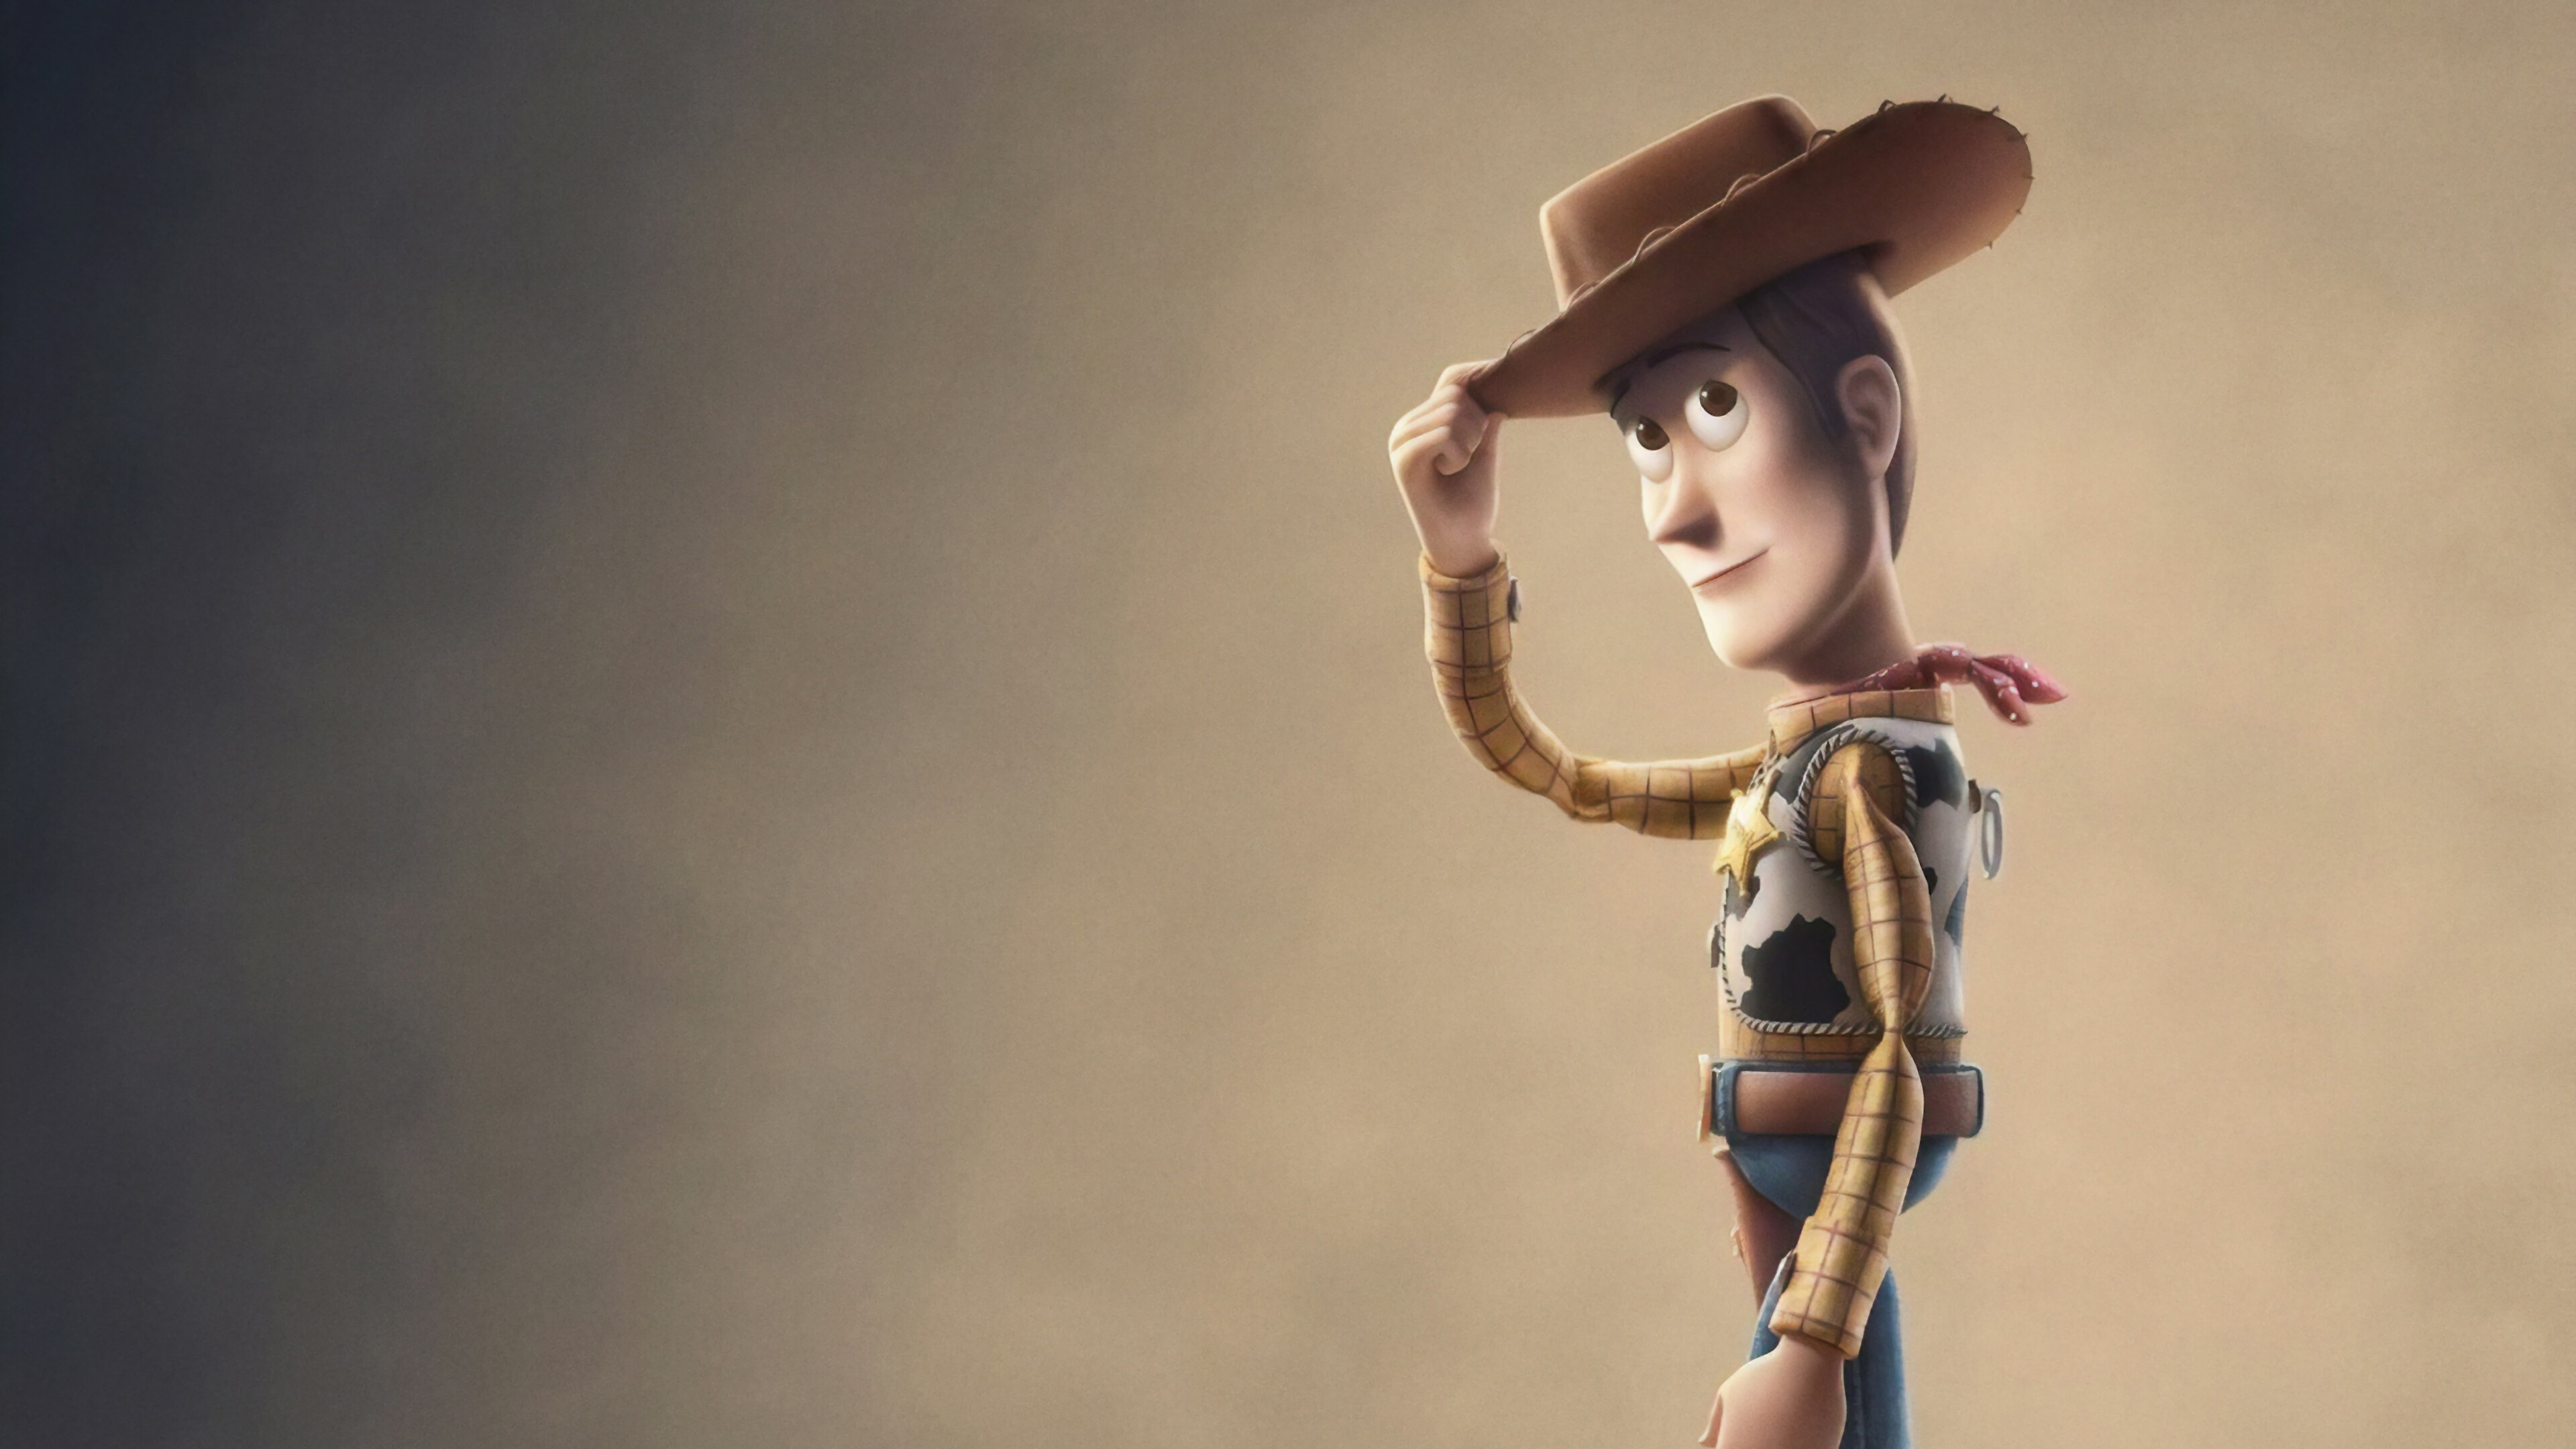 Toy Story: Woody, voiced by Tom Hanks, Andy's favorite toy, Pixar. 3840x2160 4K Wallpaper.